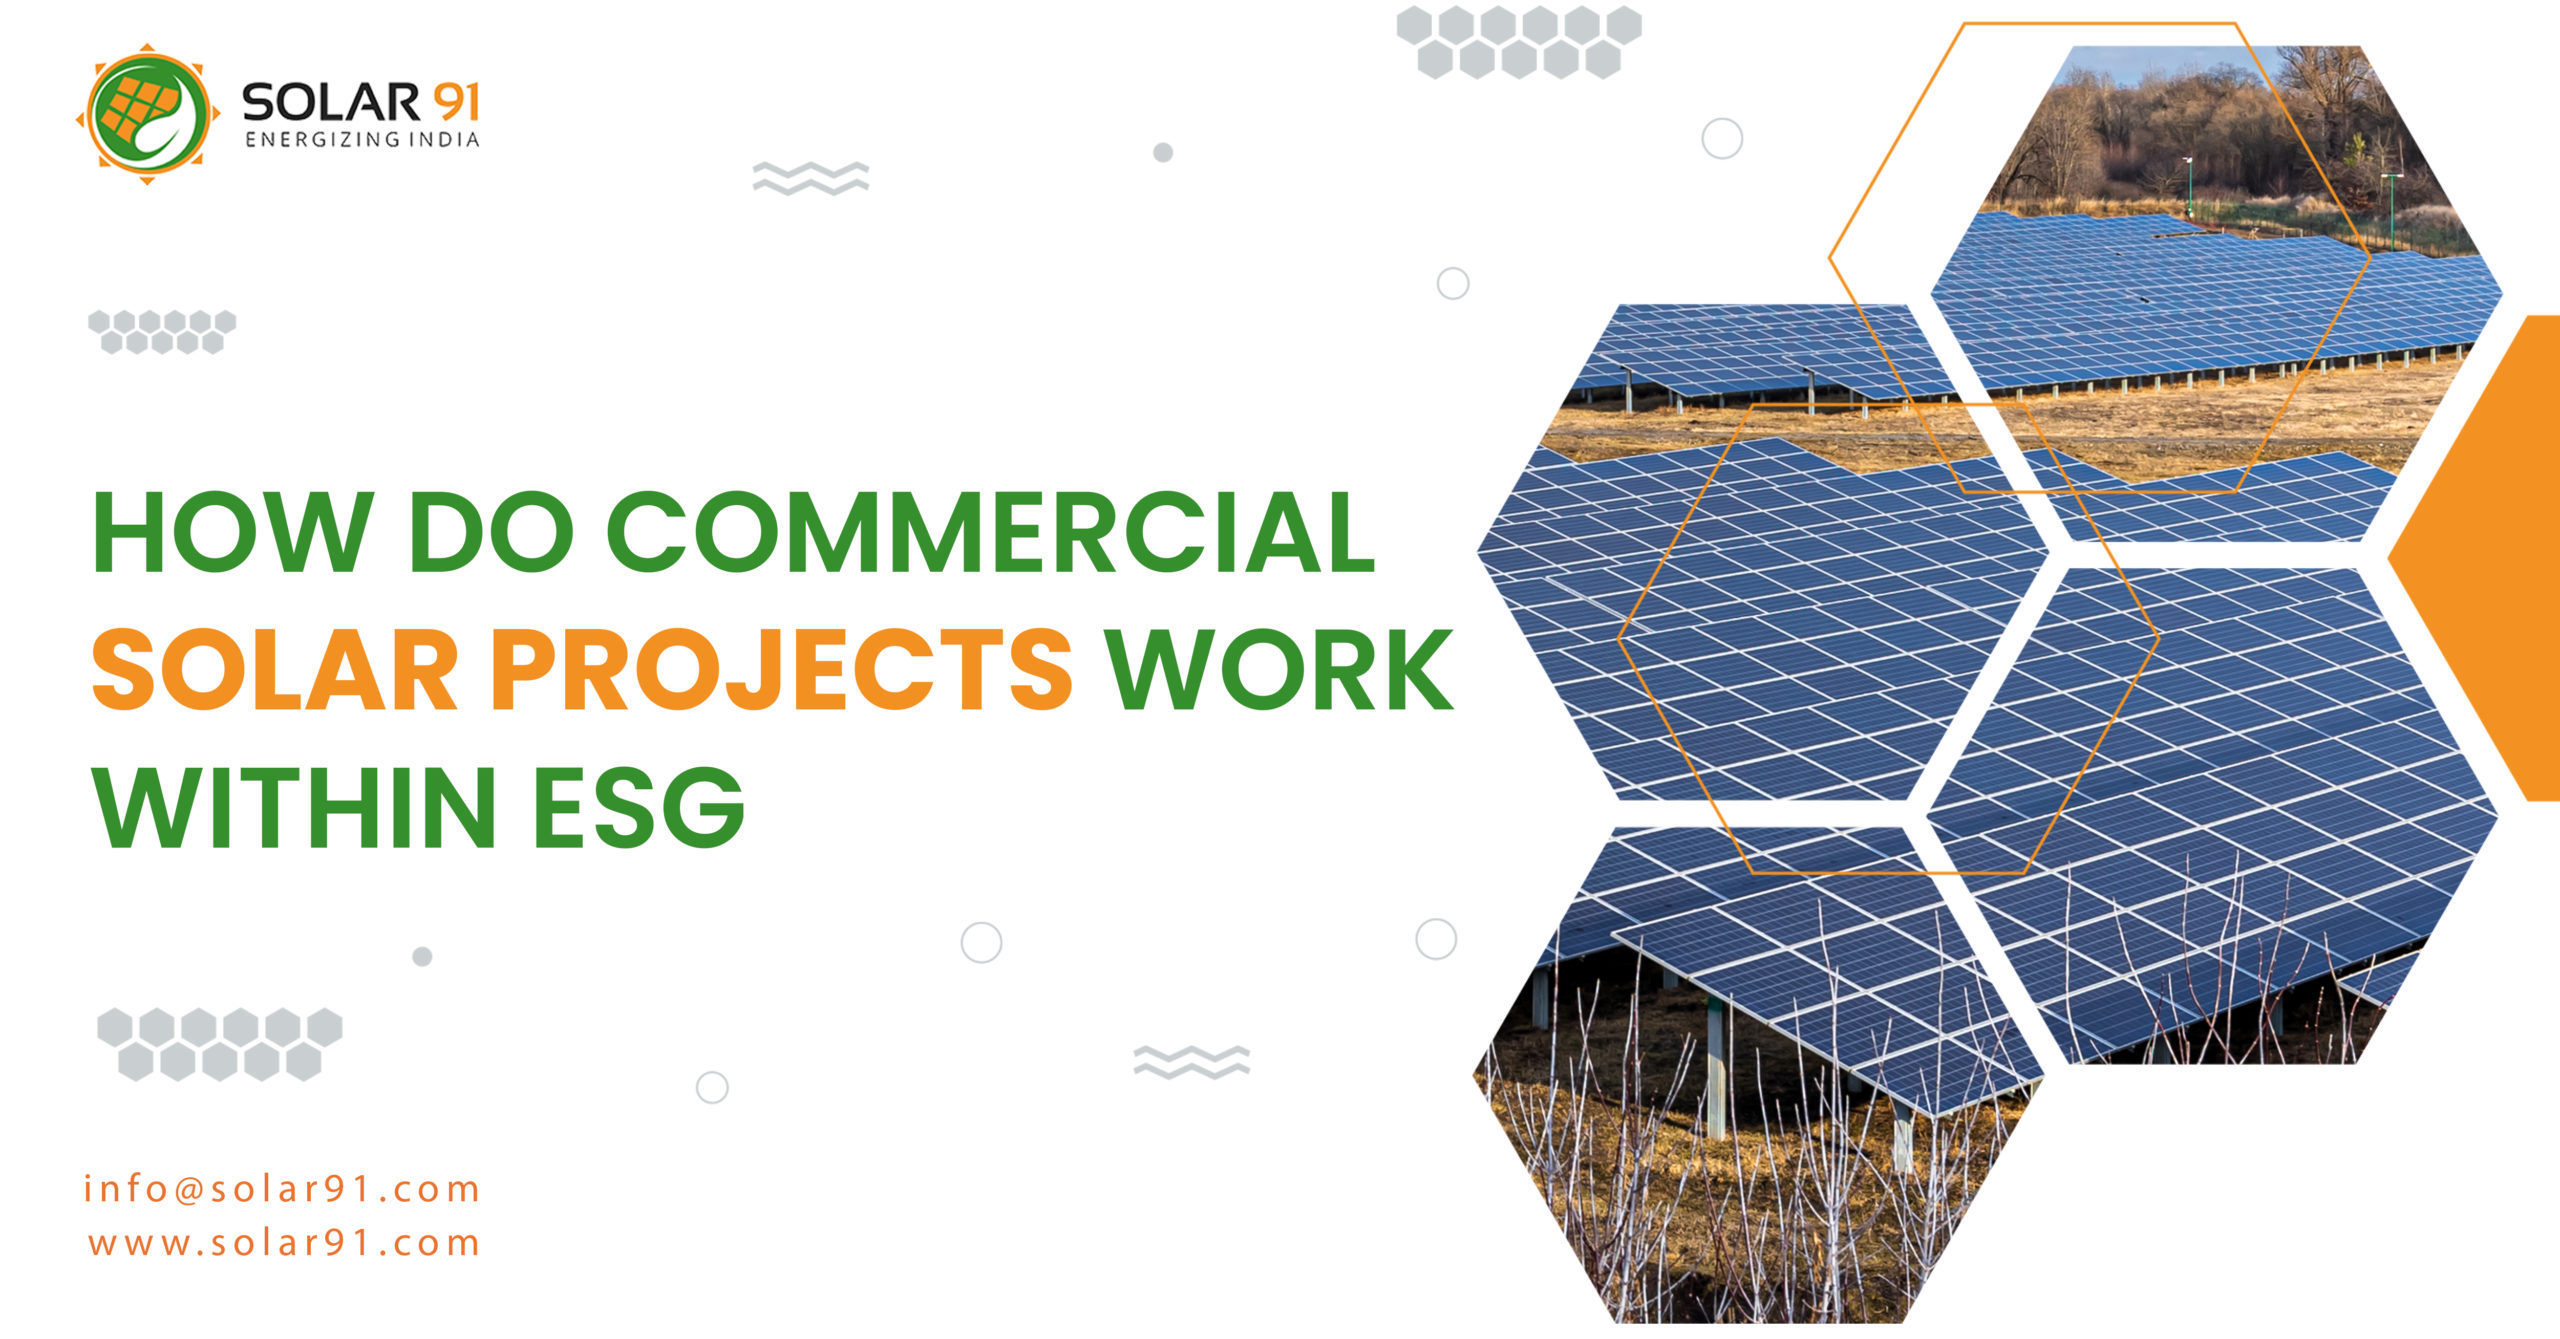 Solar Projects Work Within ESG